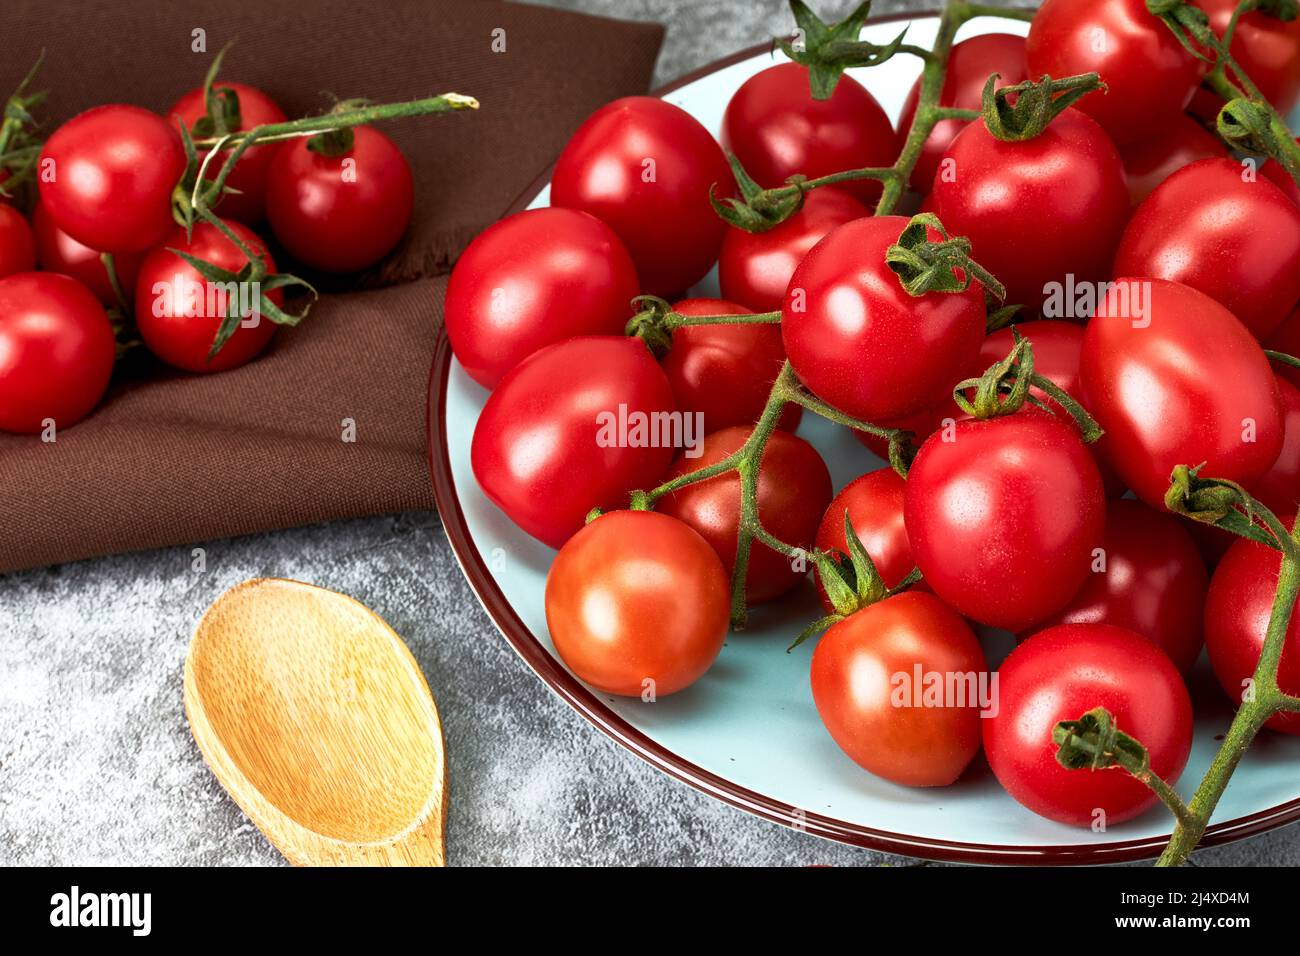 Composition of ripe cherry tomatoes on a plate and a wooden spoon on a stone countertop. Healthy food. Vegan food. Vegetarian food Stock Photo